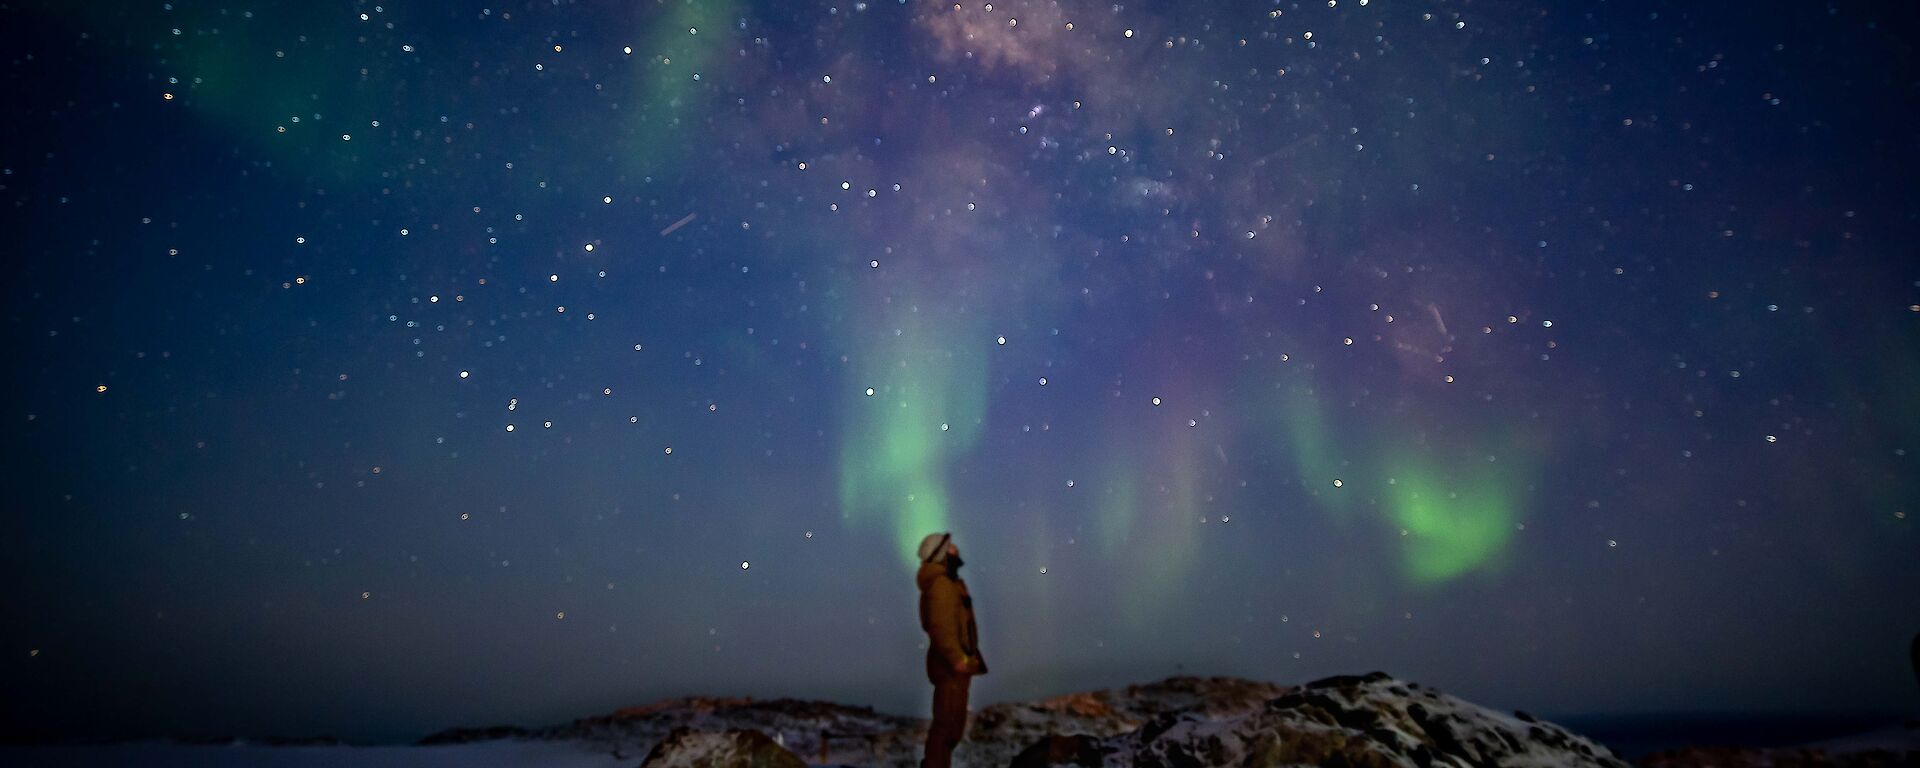 A man stands silhouetted against the sky.  A green and pink aurora and stars light up the sky.